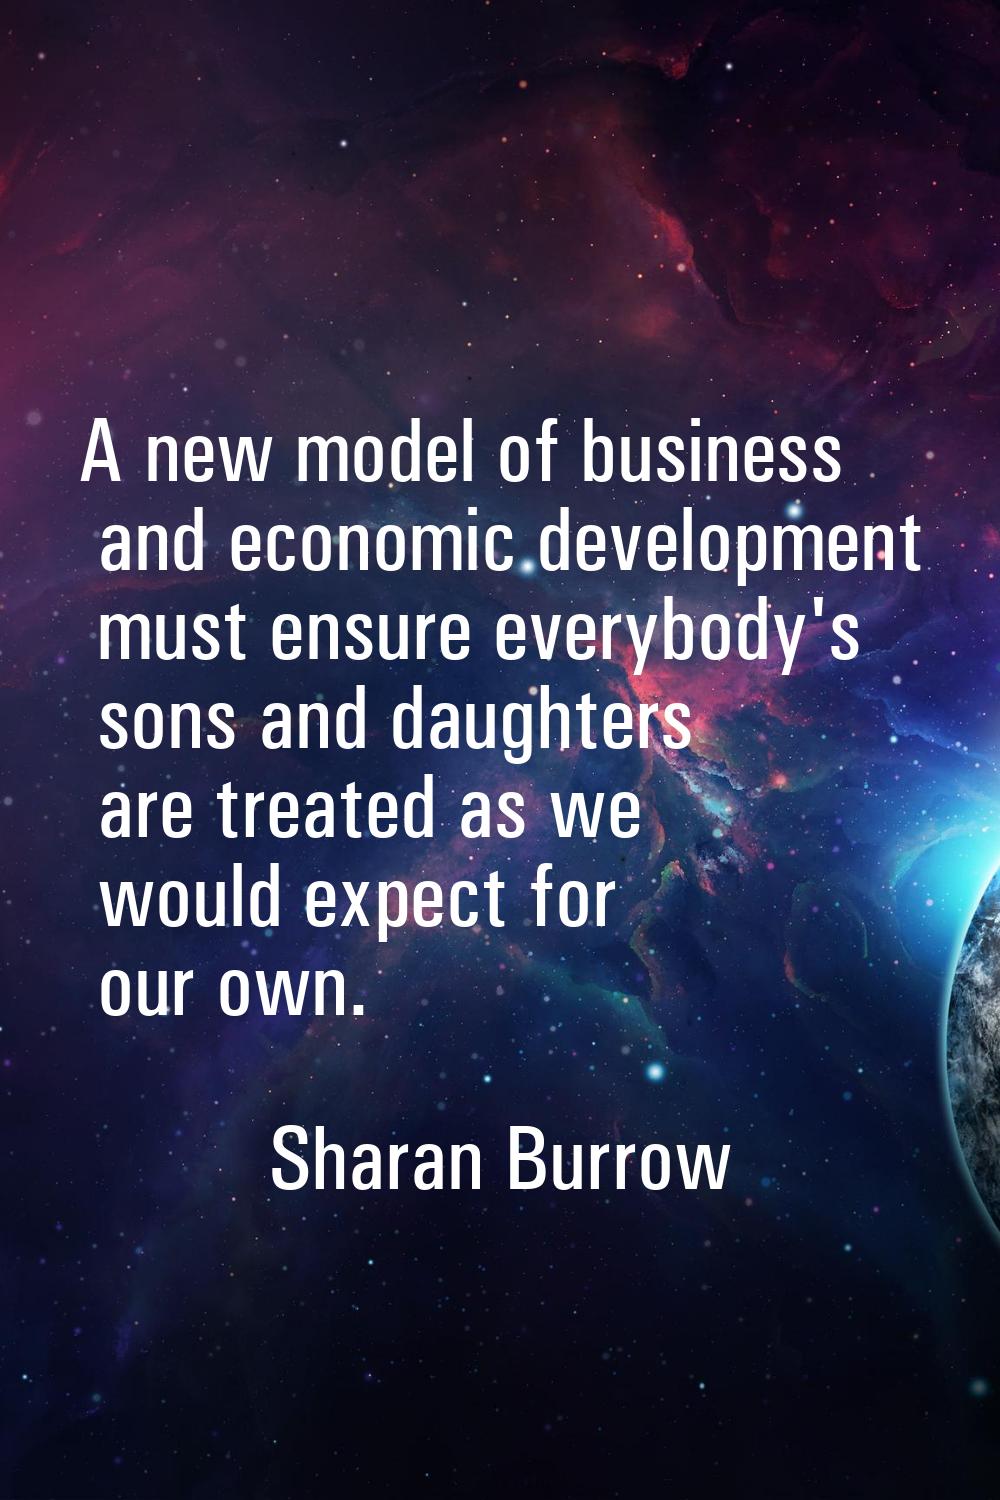 A new model of business and economic development must ensure everybody's sons and daughters are tre